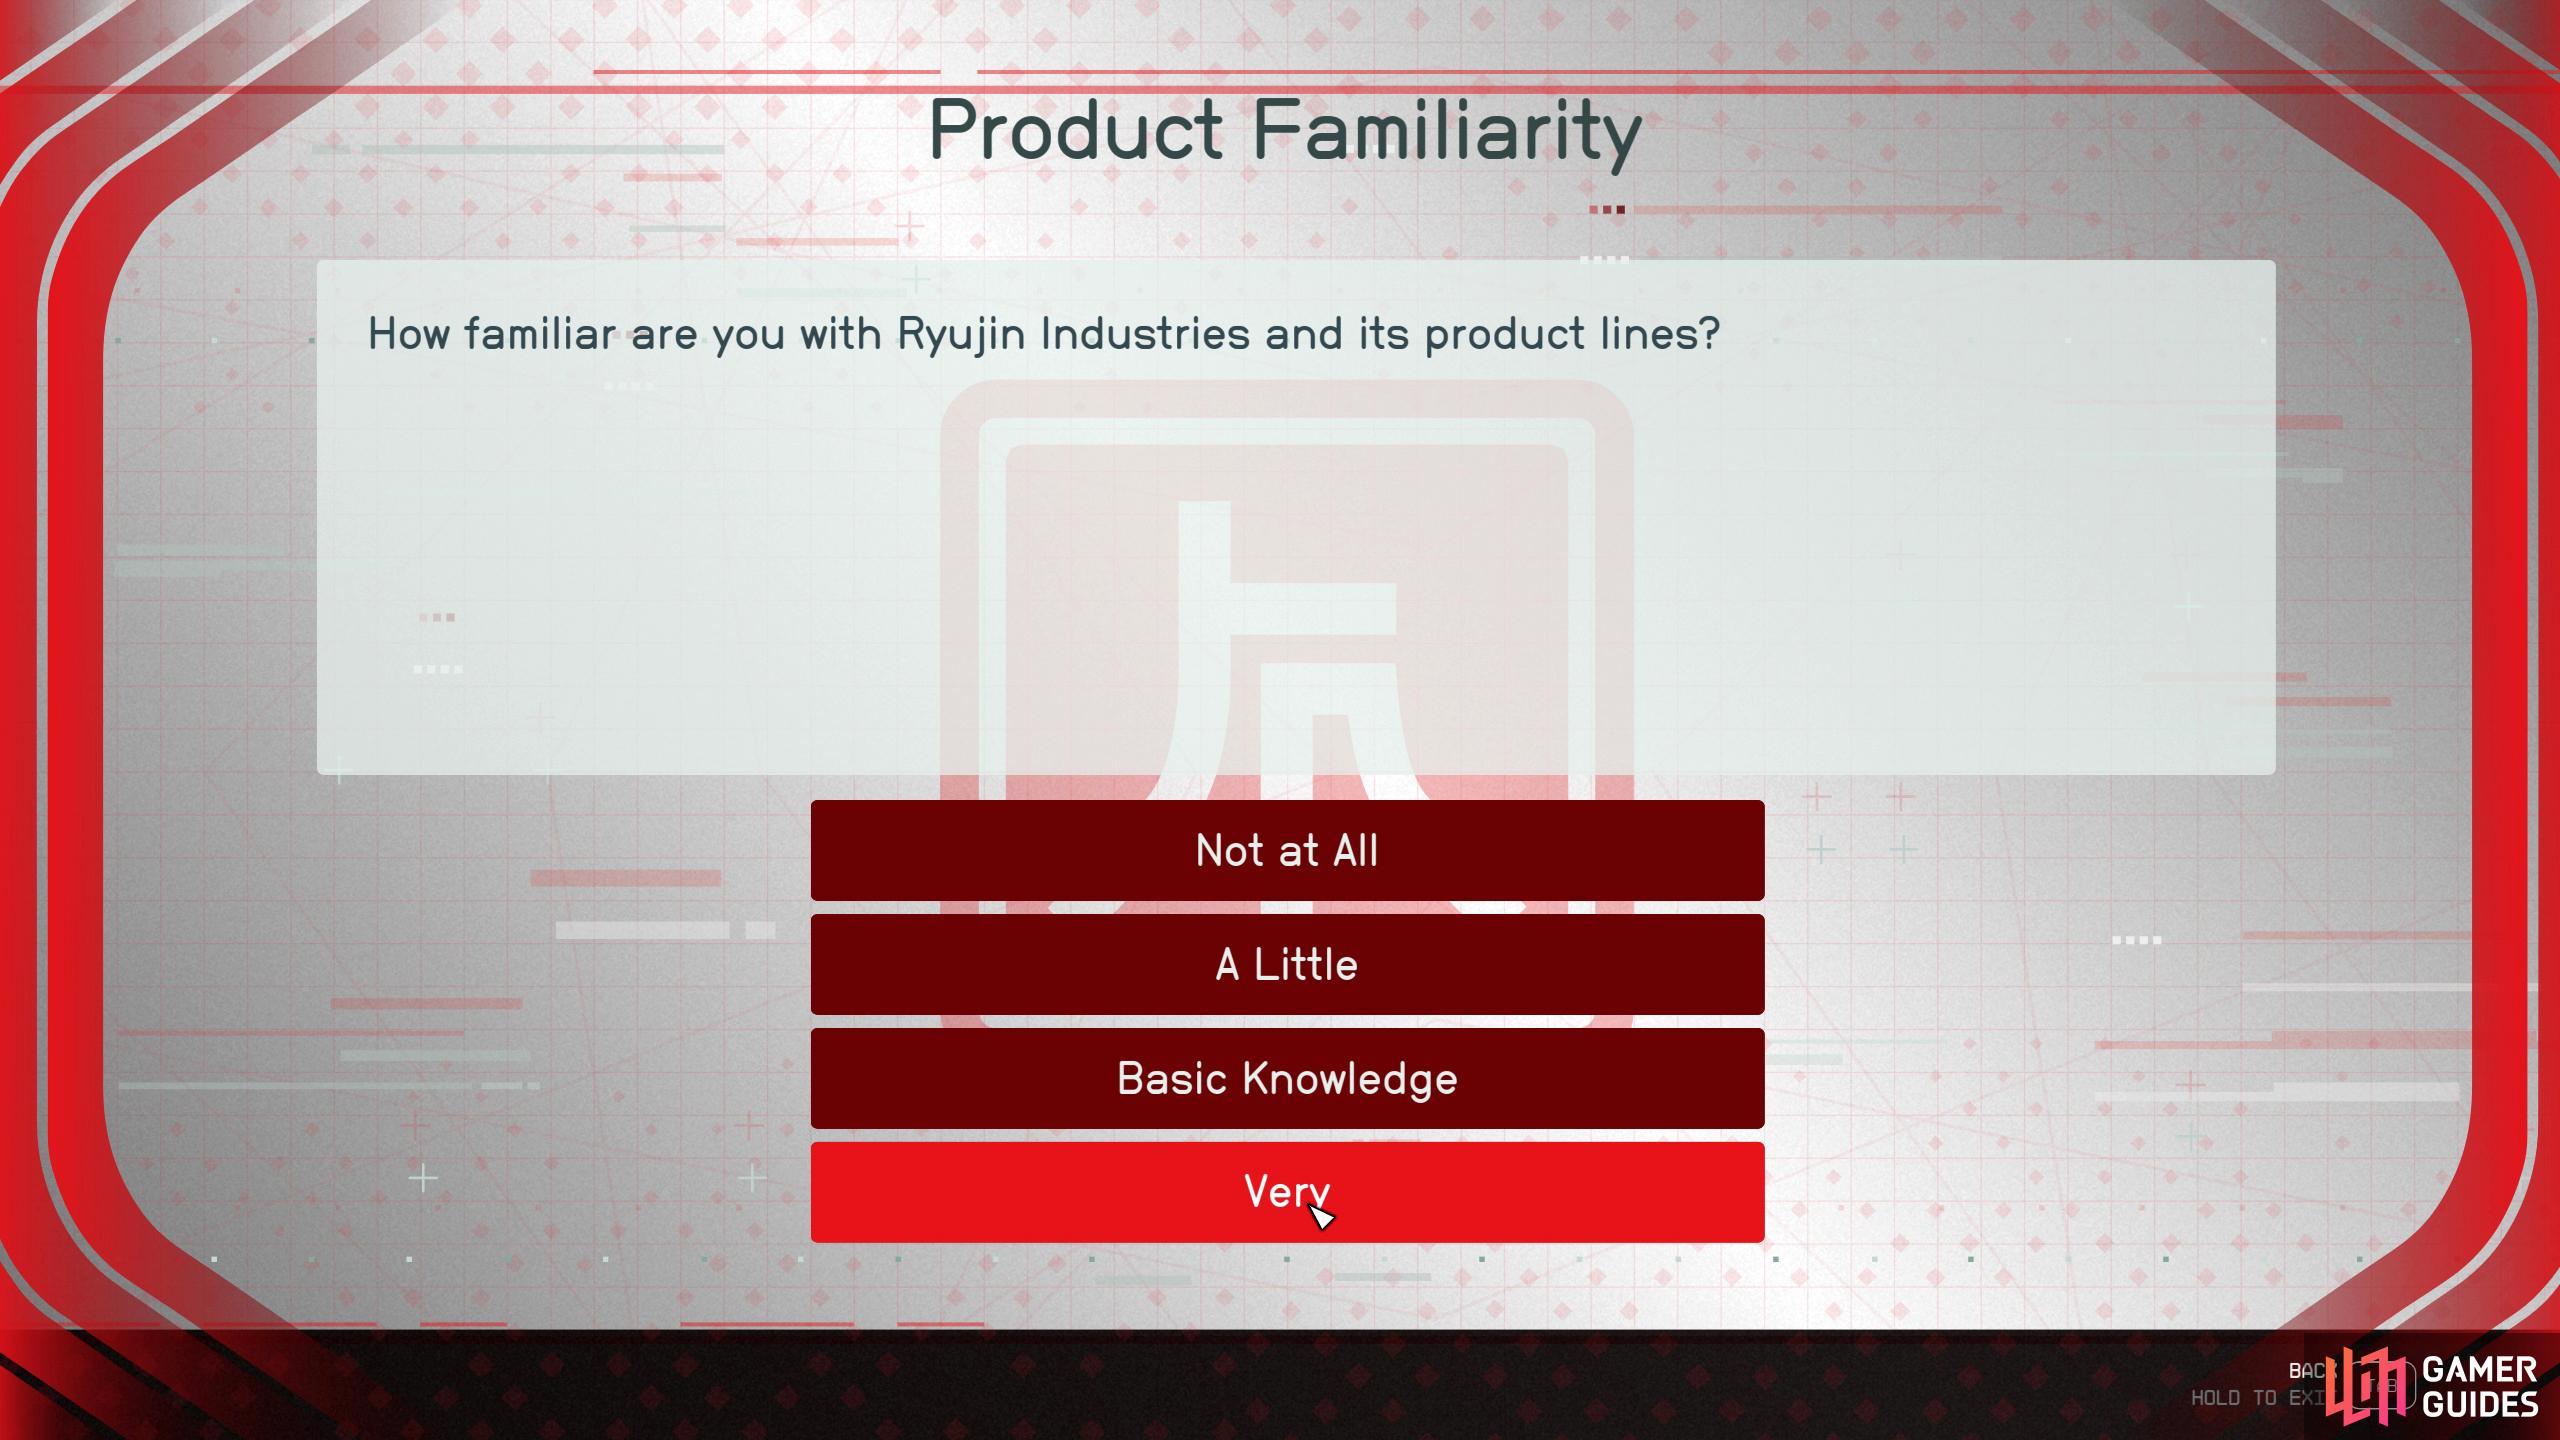 Then answer "very" for Product Familiarity.